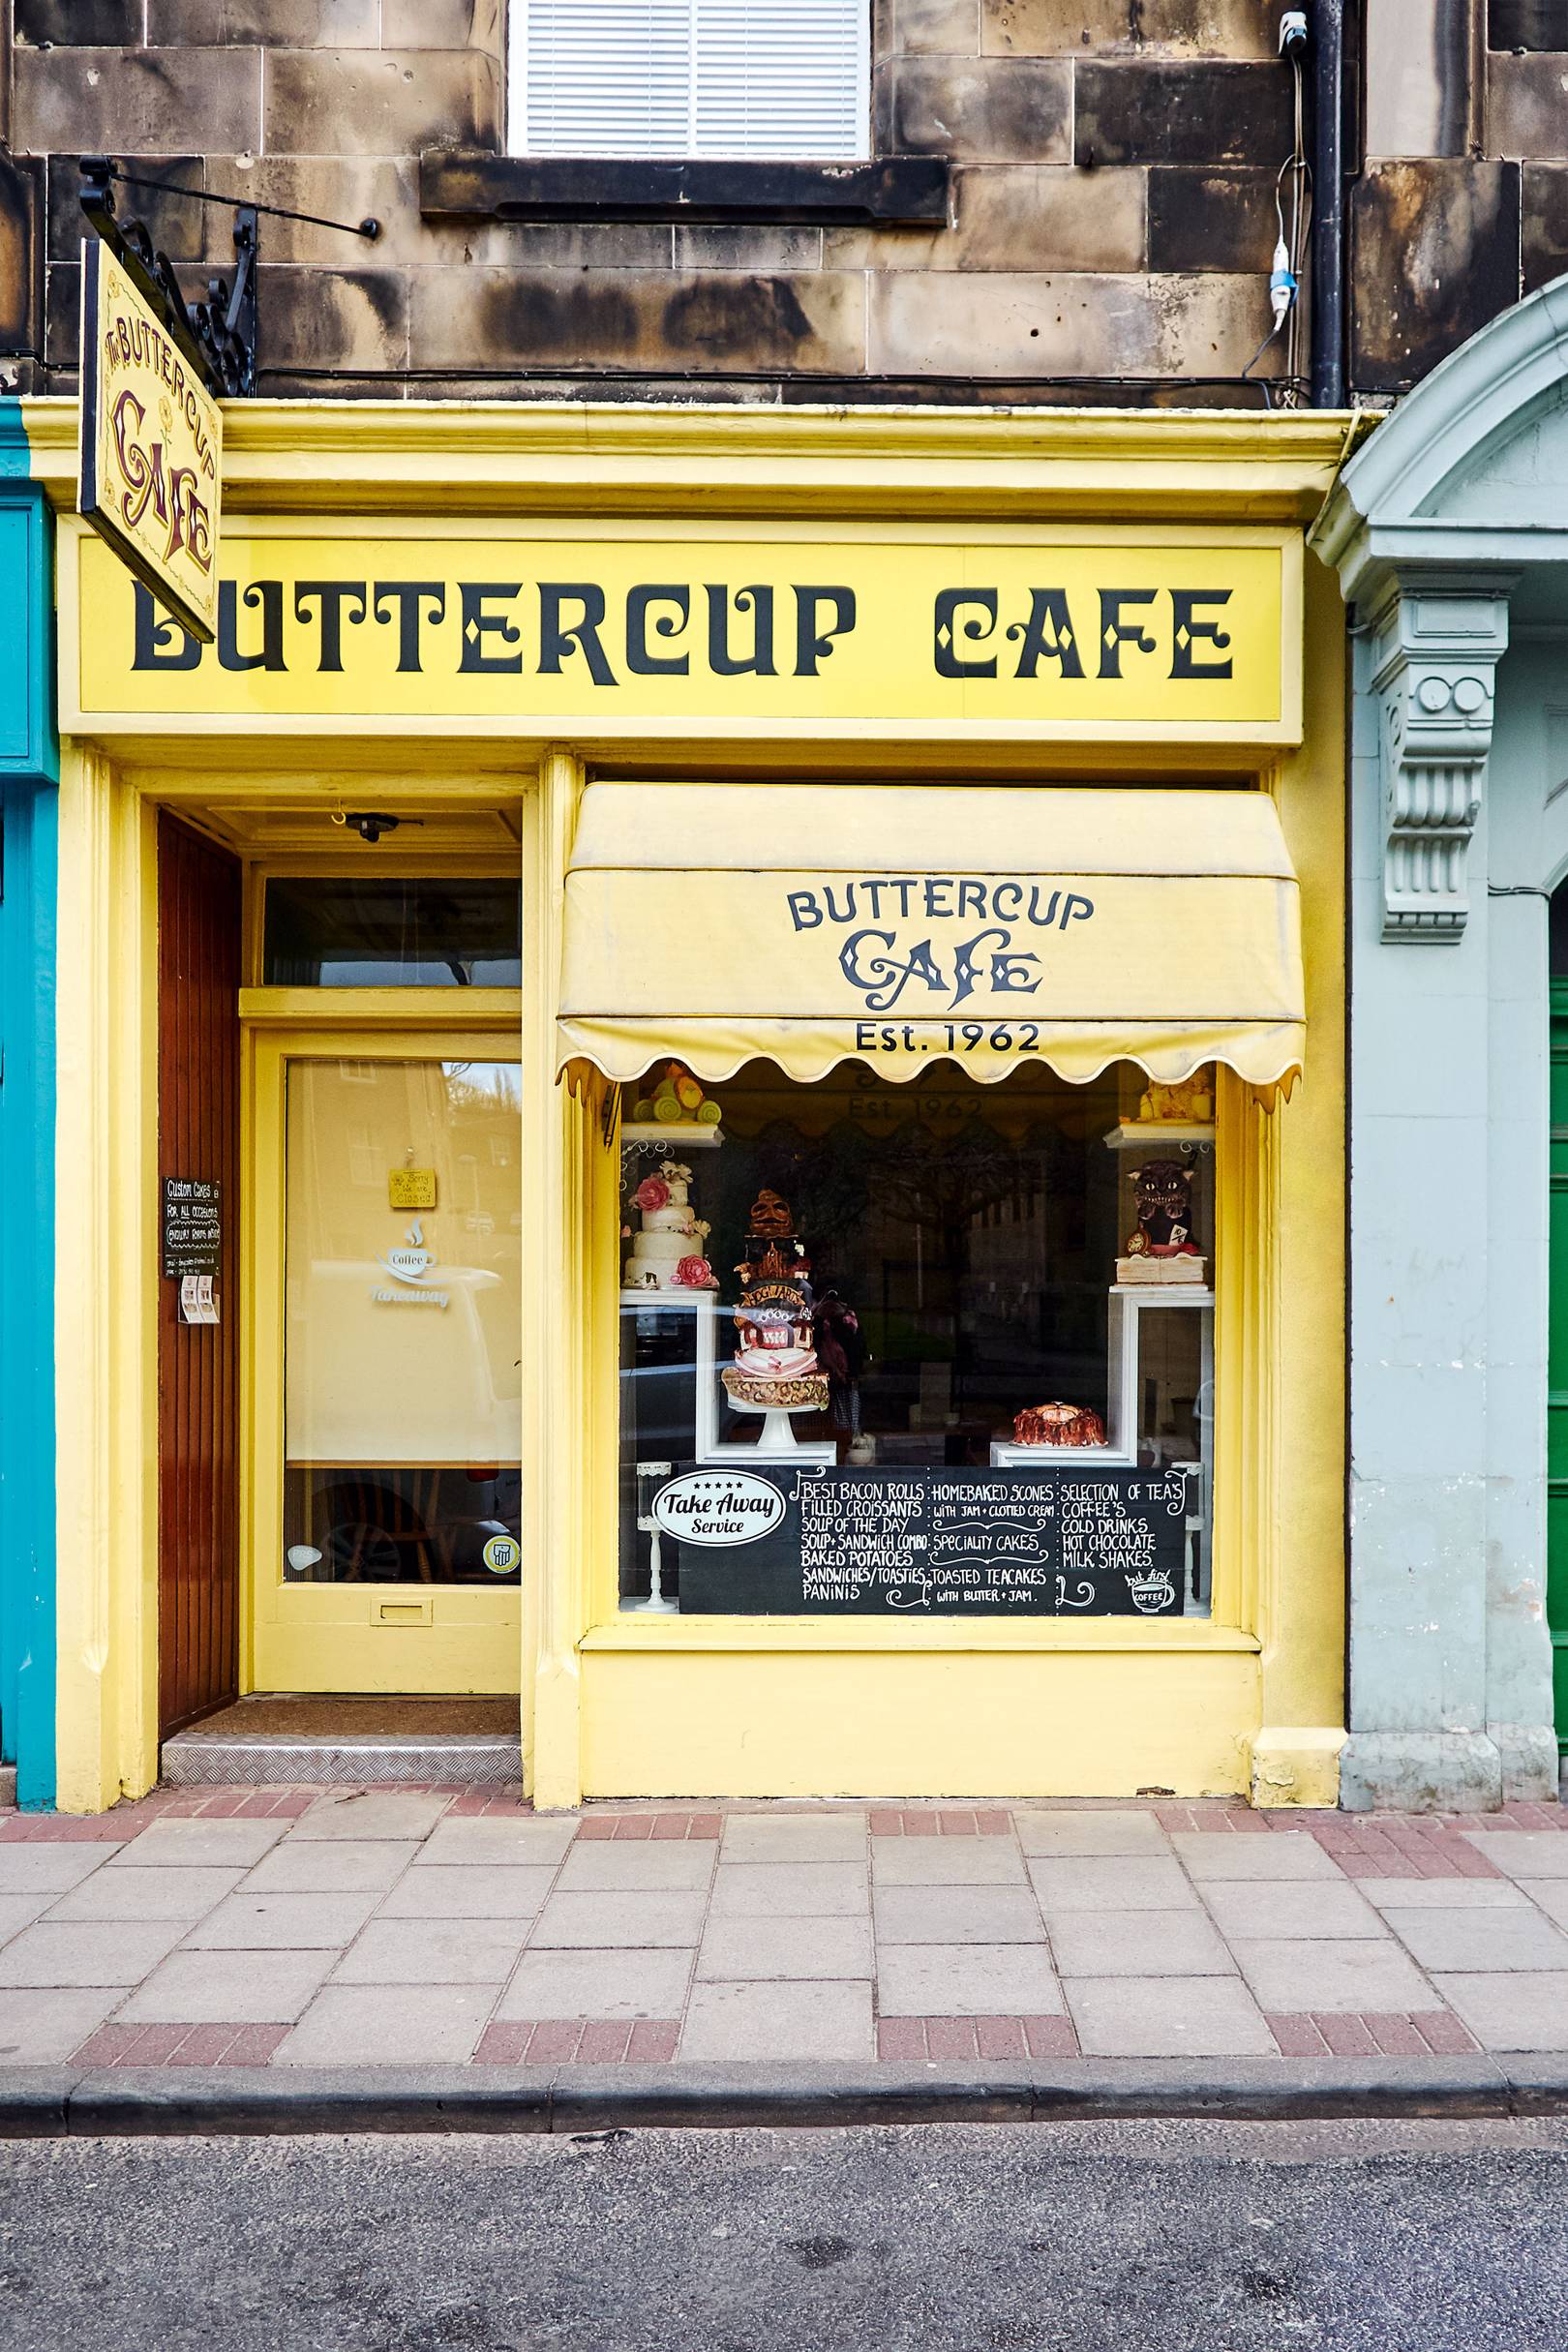 buttercup cafe prices